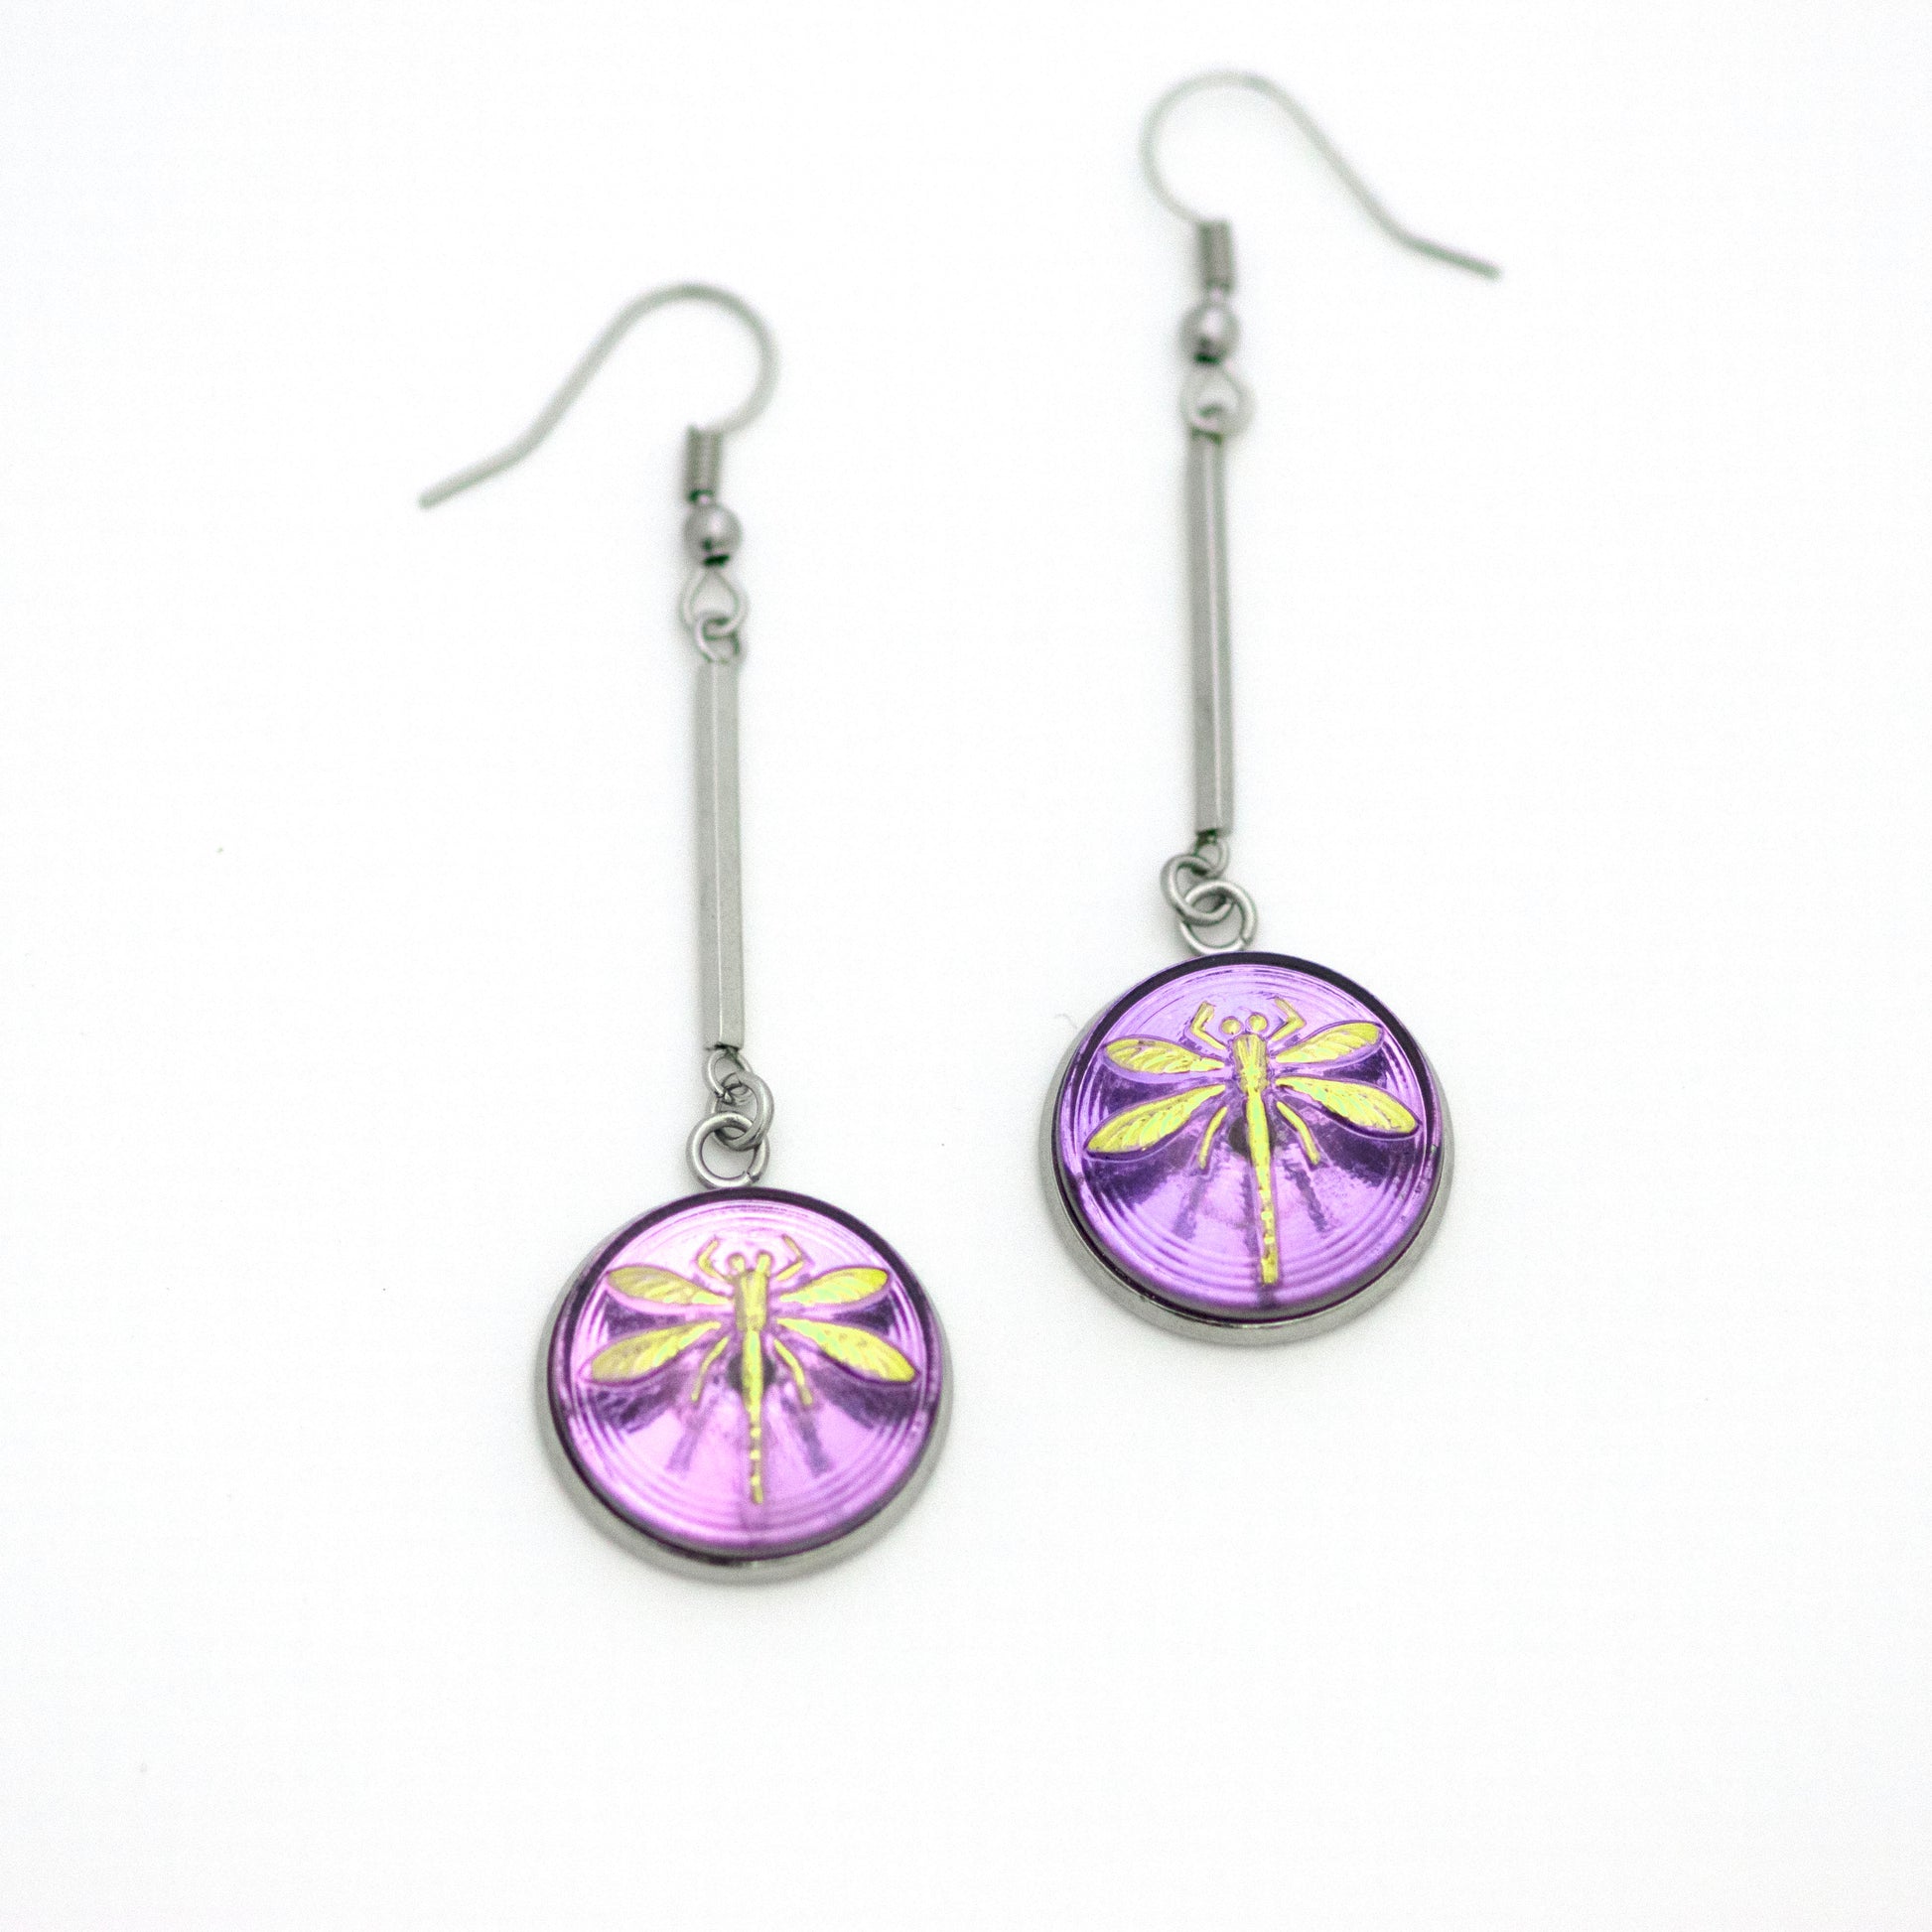 Purple and gold dragonfly buttons Czech glass button drop dangle earrings.